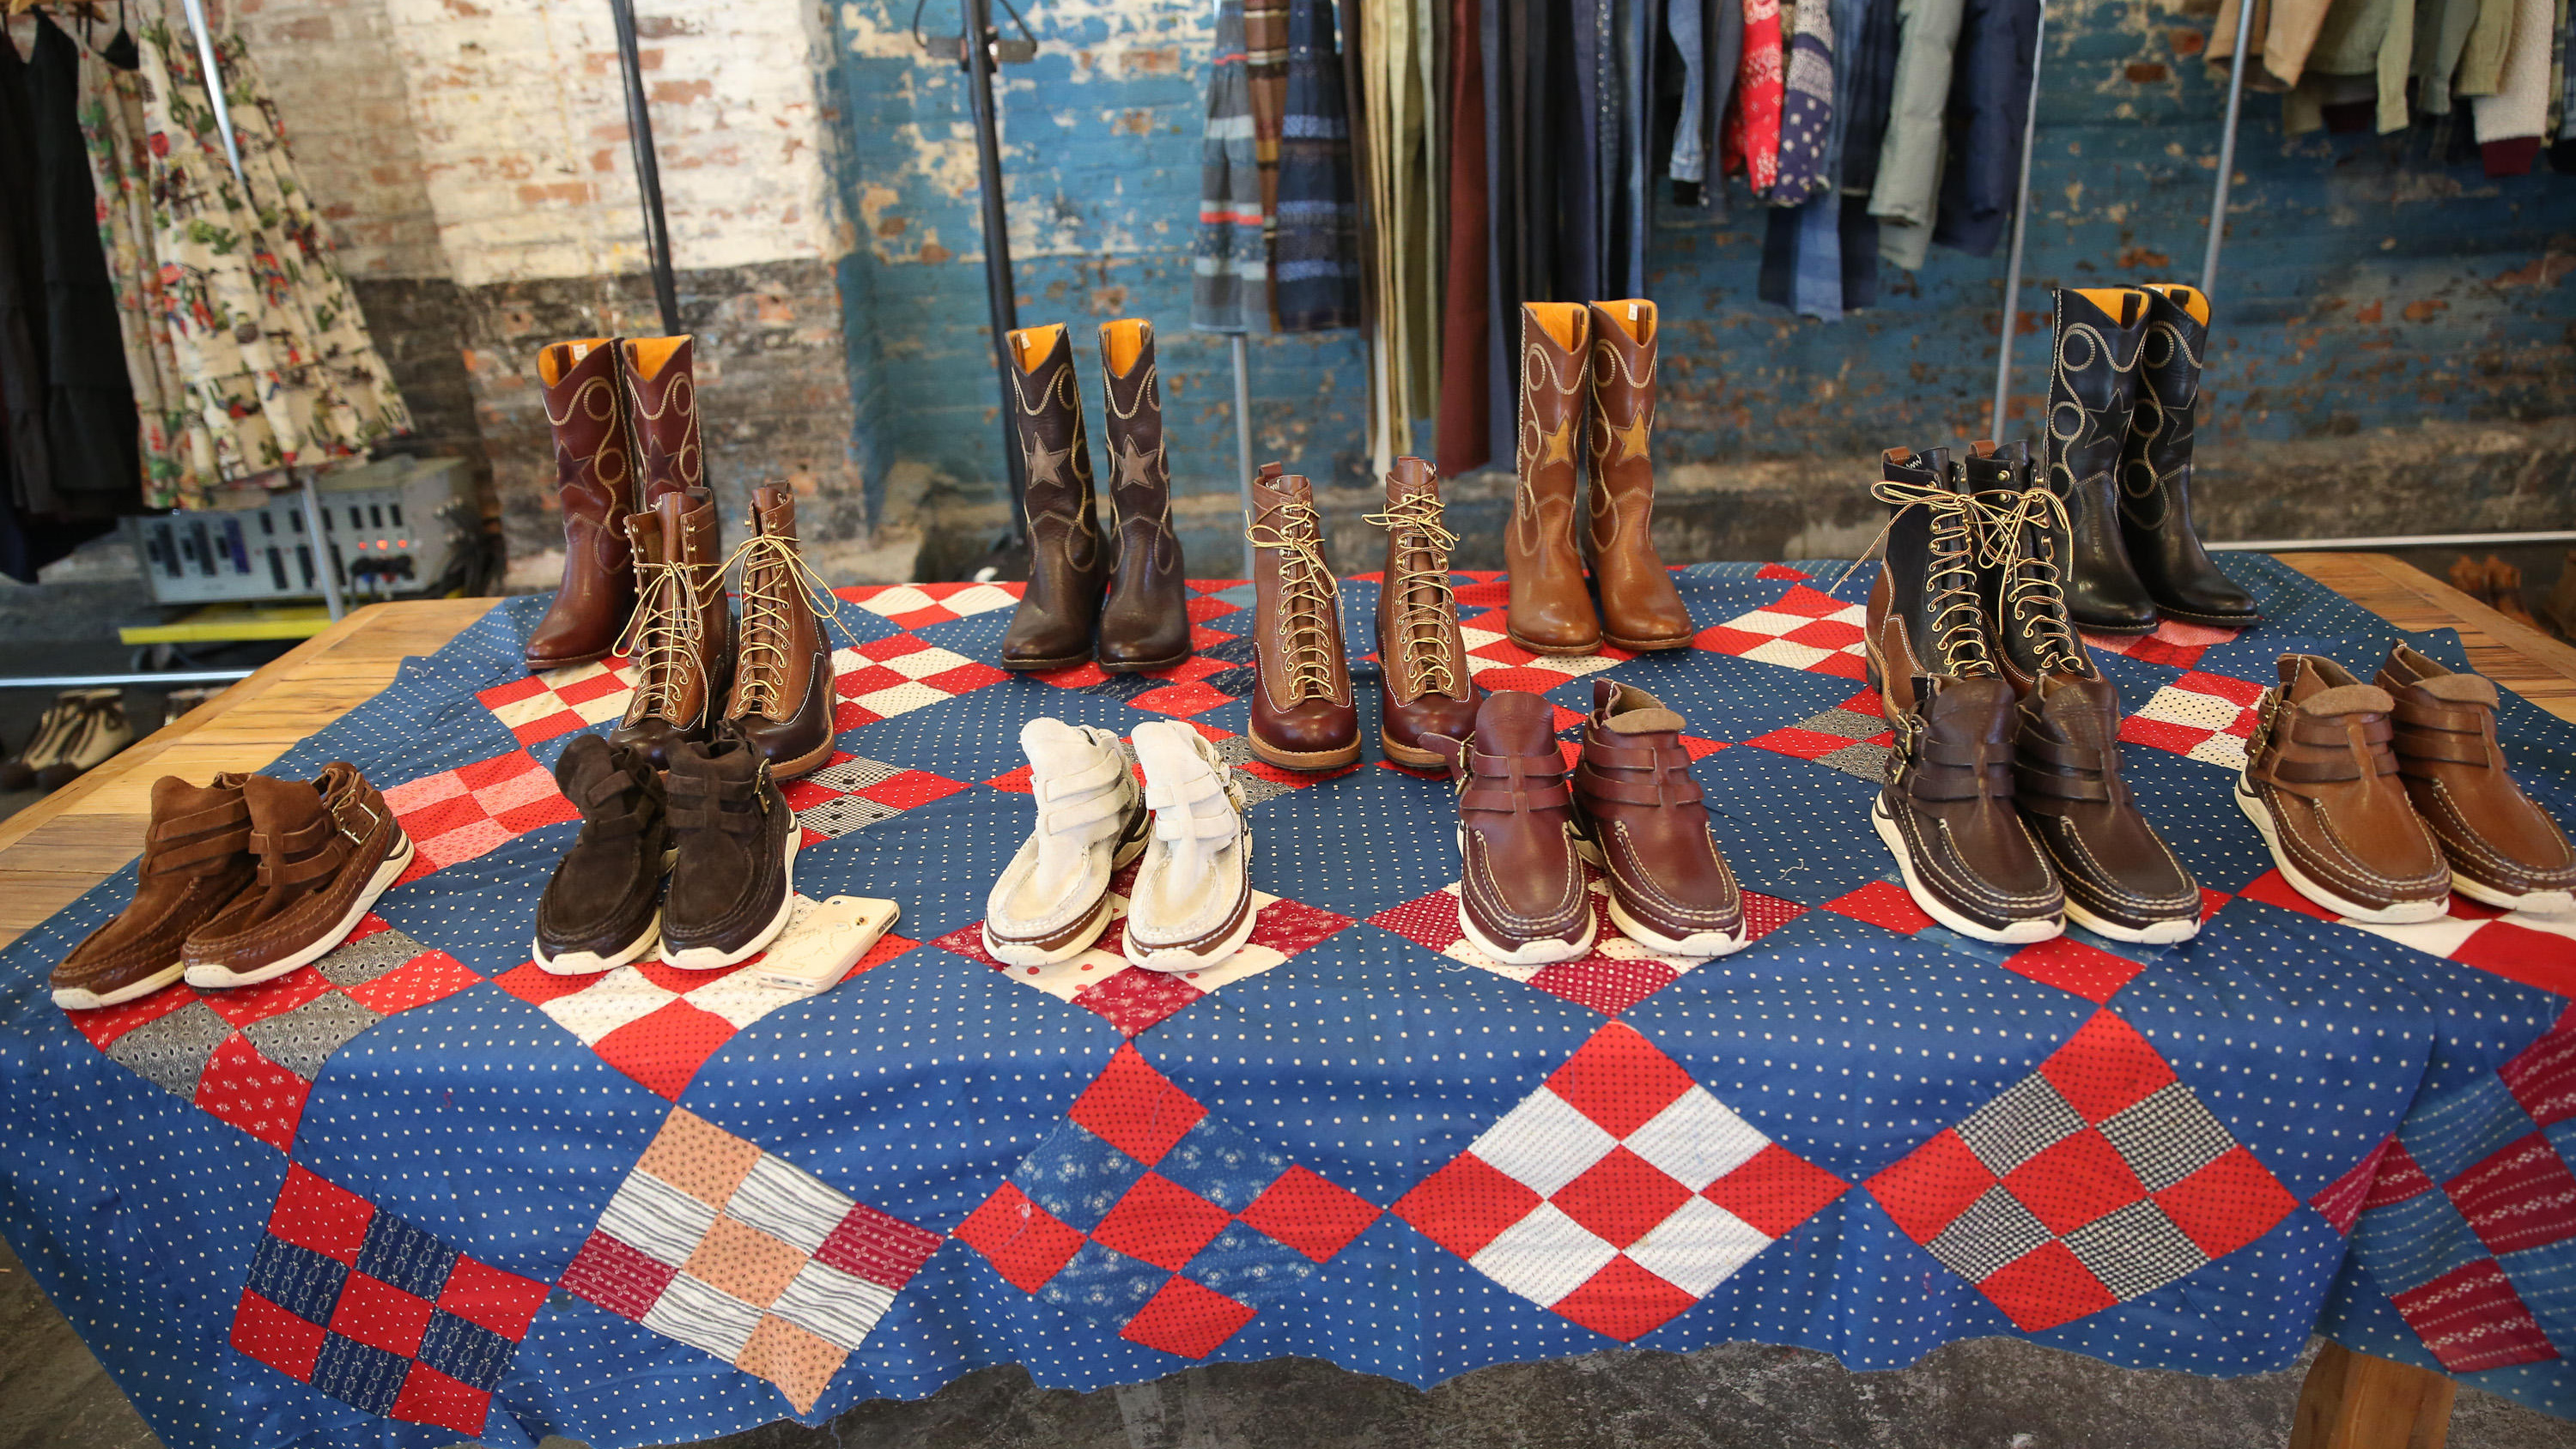 Footwear from visvim's Fall 2014 collection  Source: Getty Images

